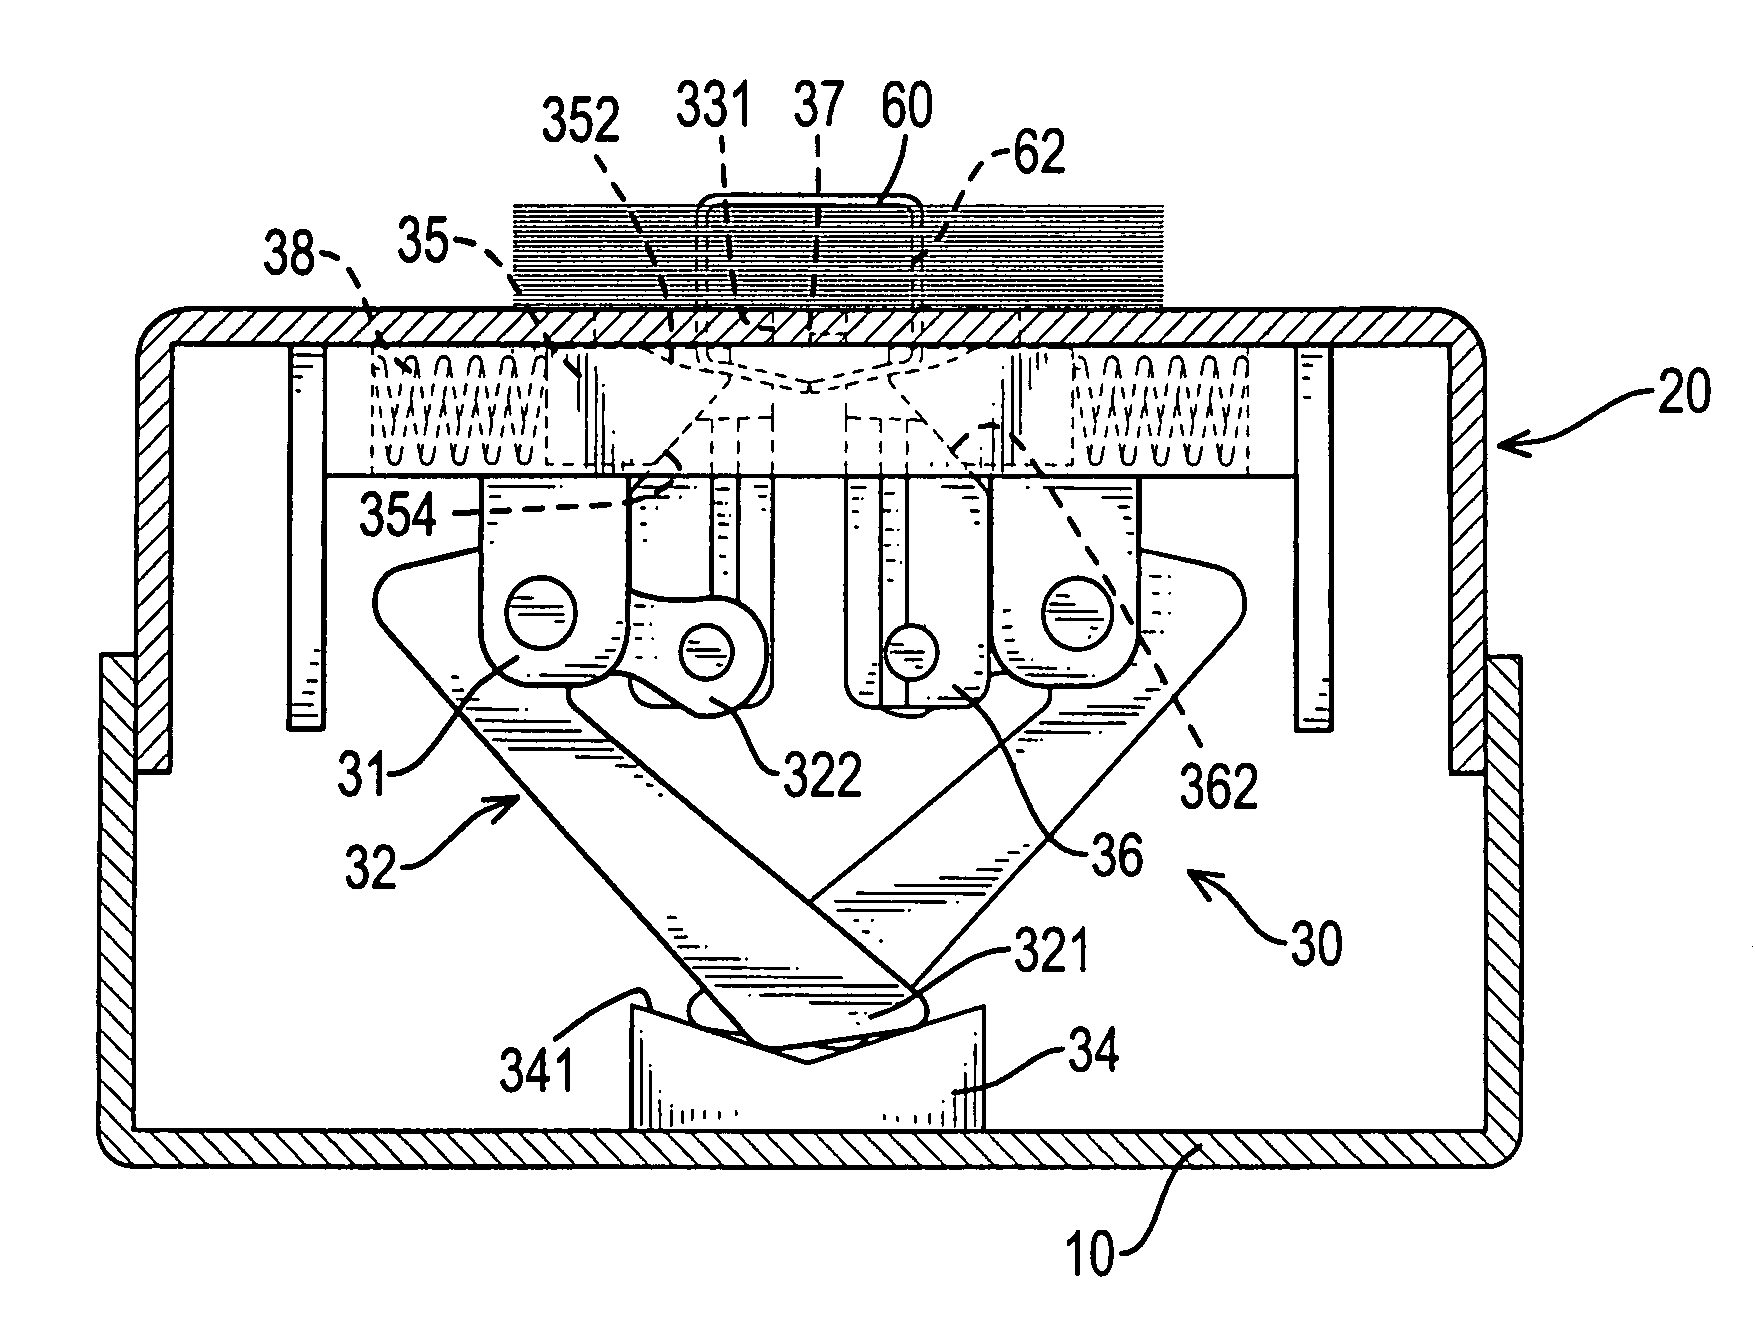 Stapler with a leg-cutting device